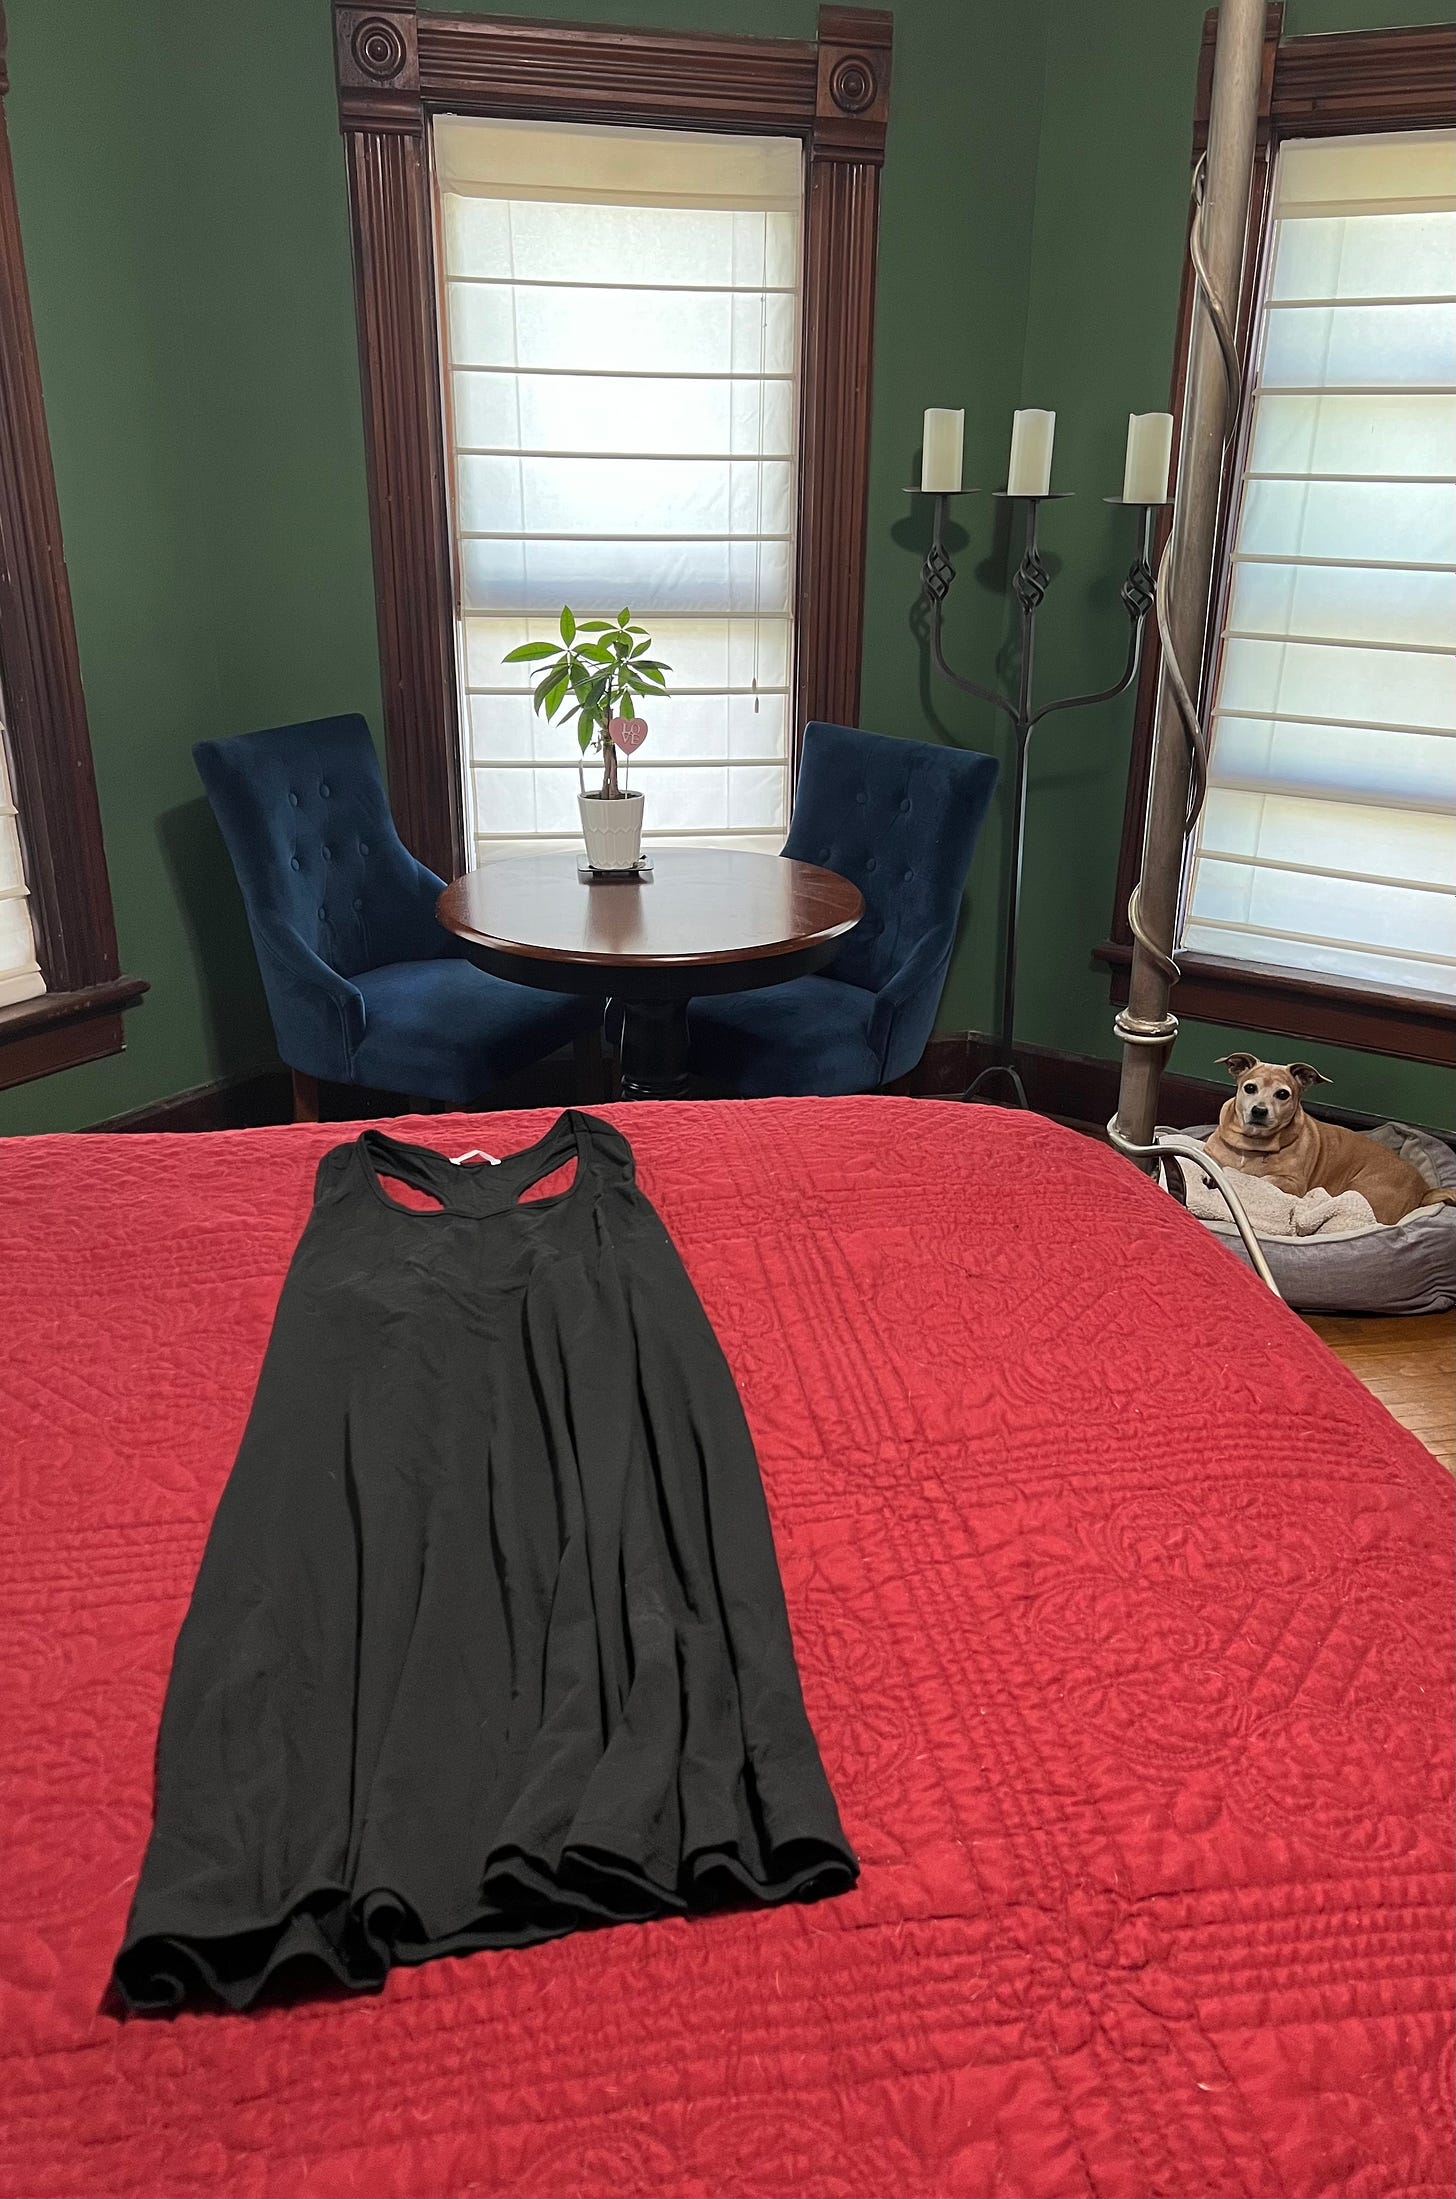 Michelle Teheux's new nightgown, and her dog!